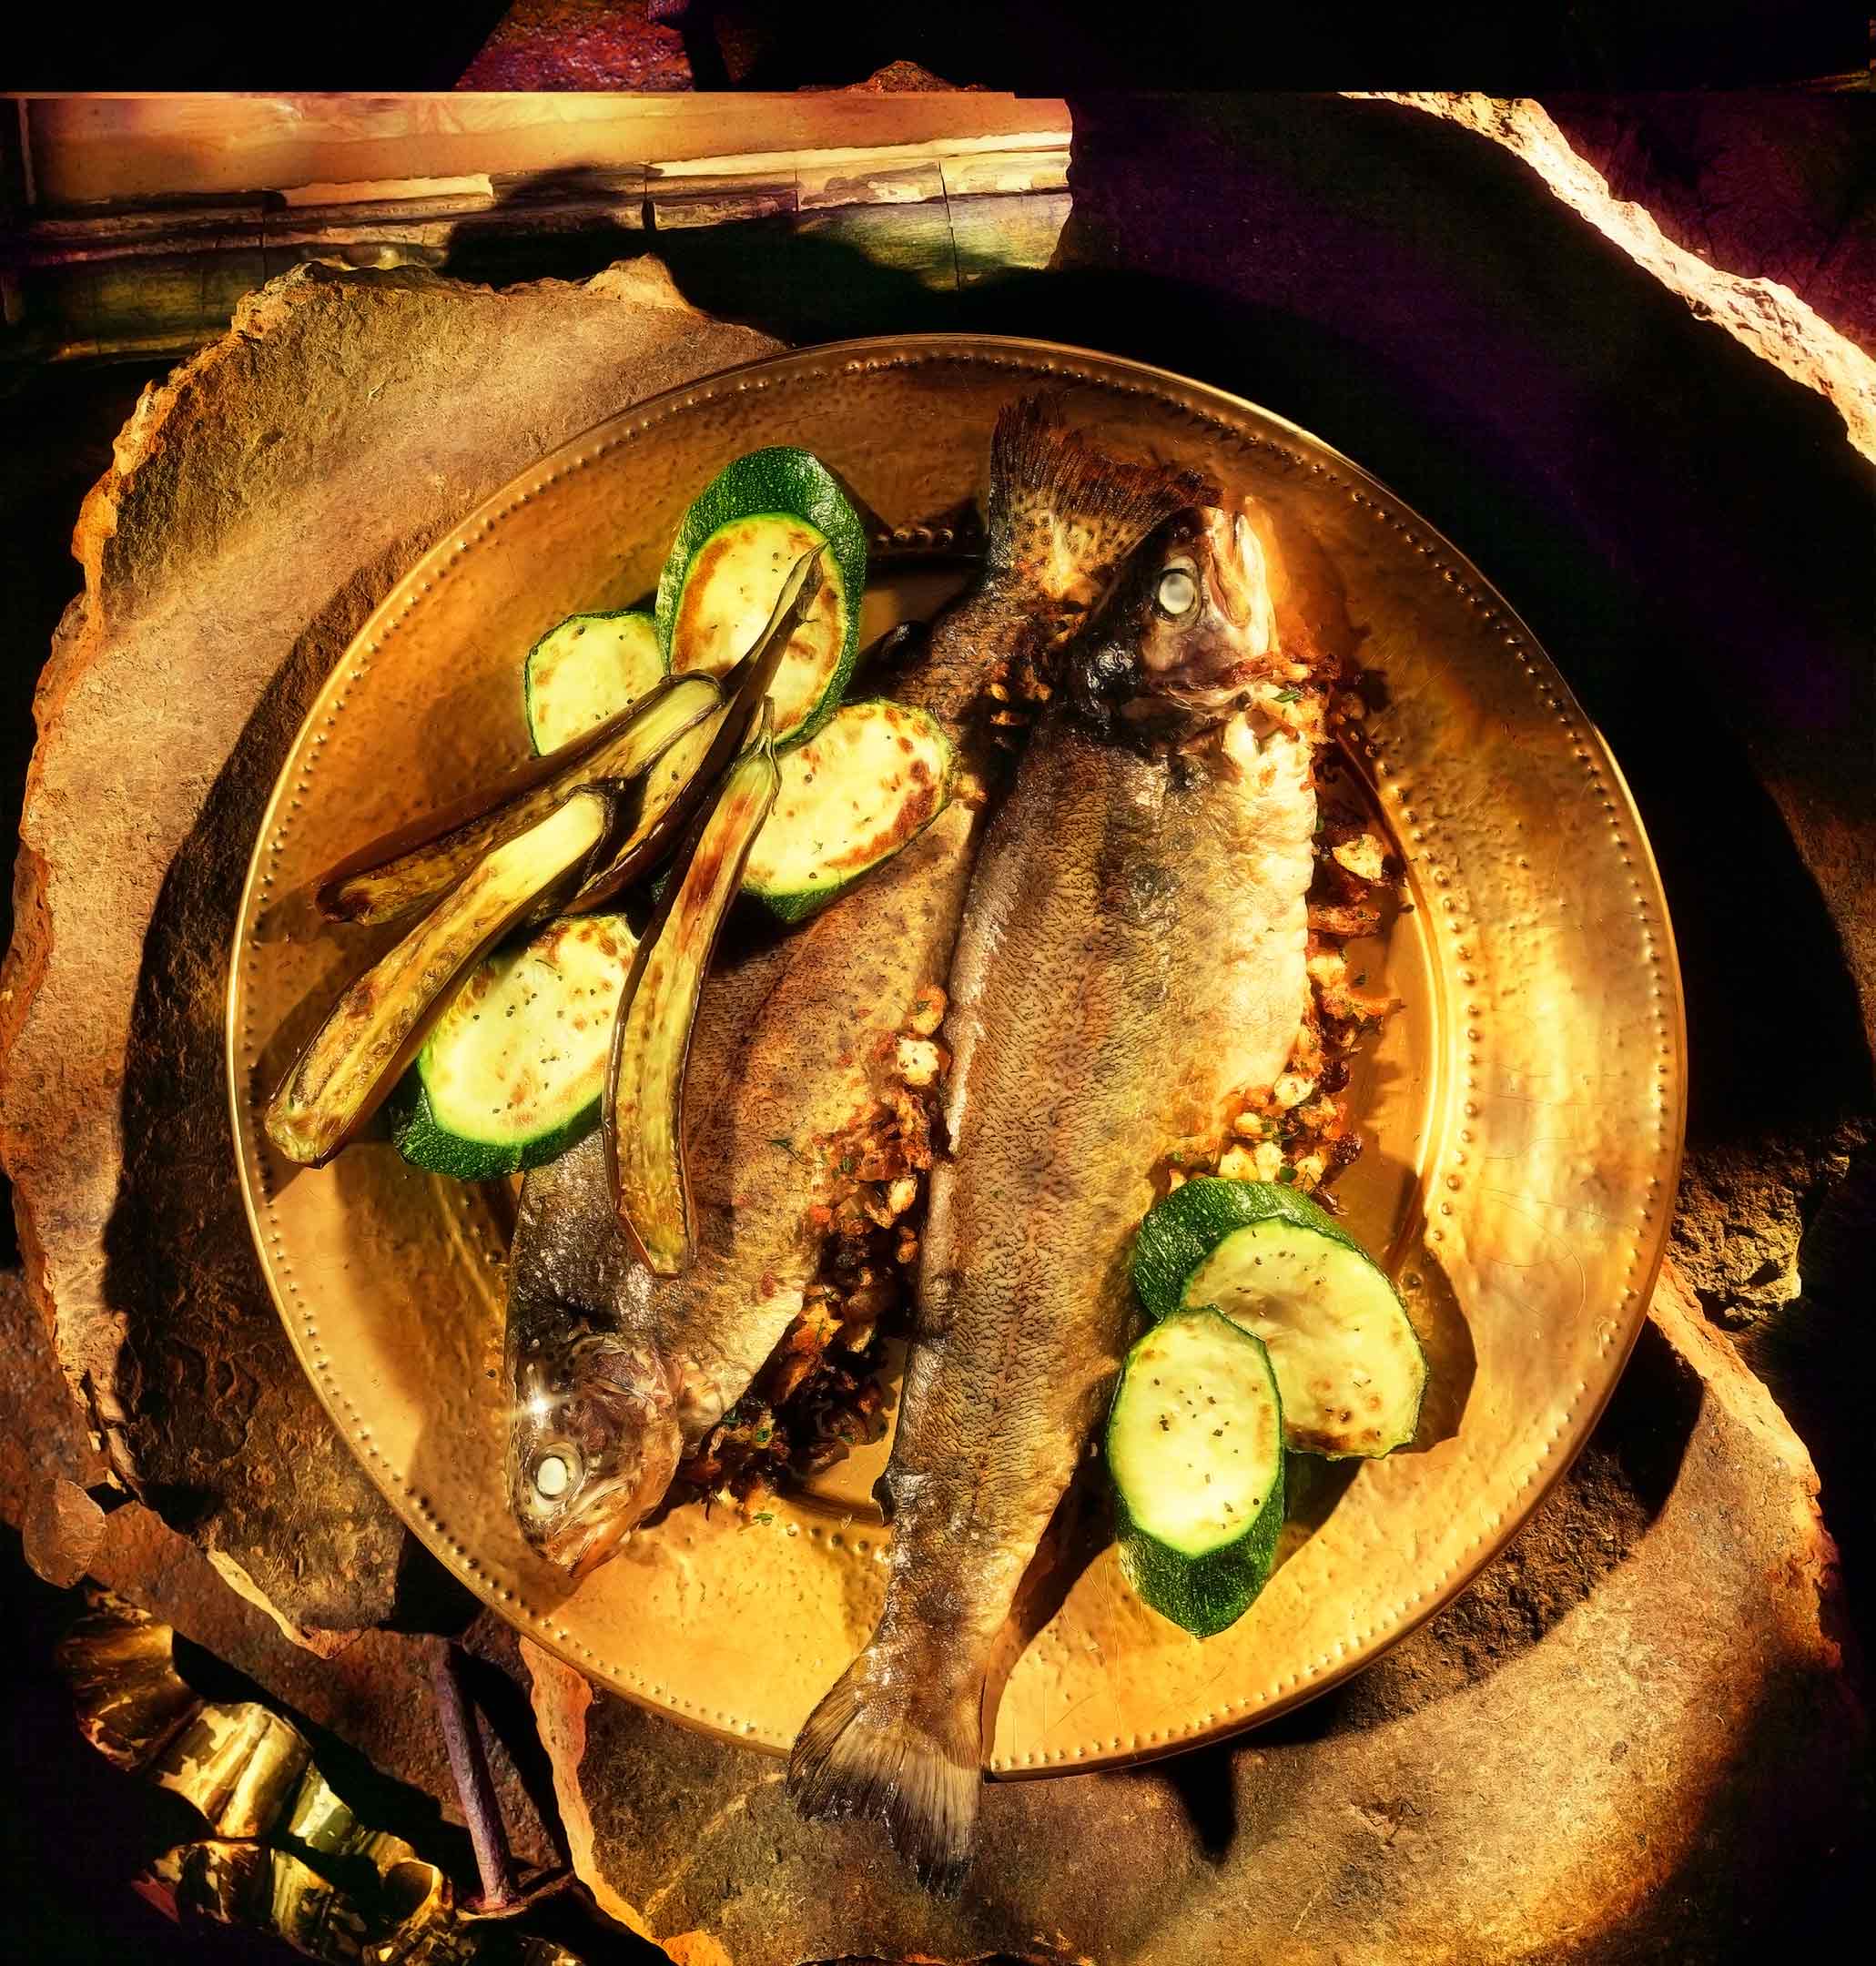 Sautéed Brook Trout with Brown Butter, Pecans, Zucchini and Eggplant